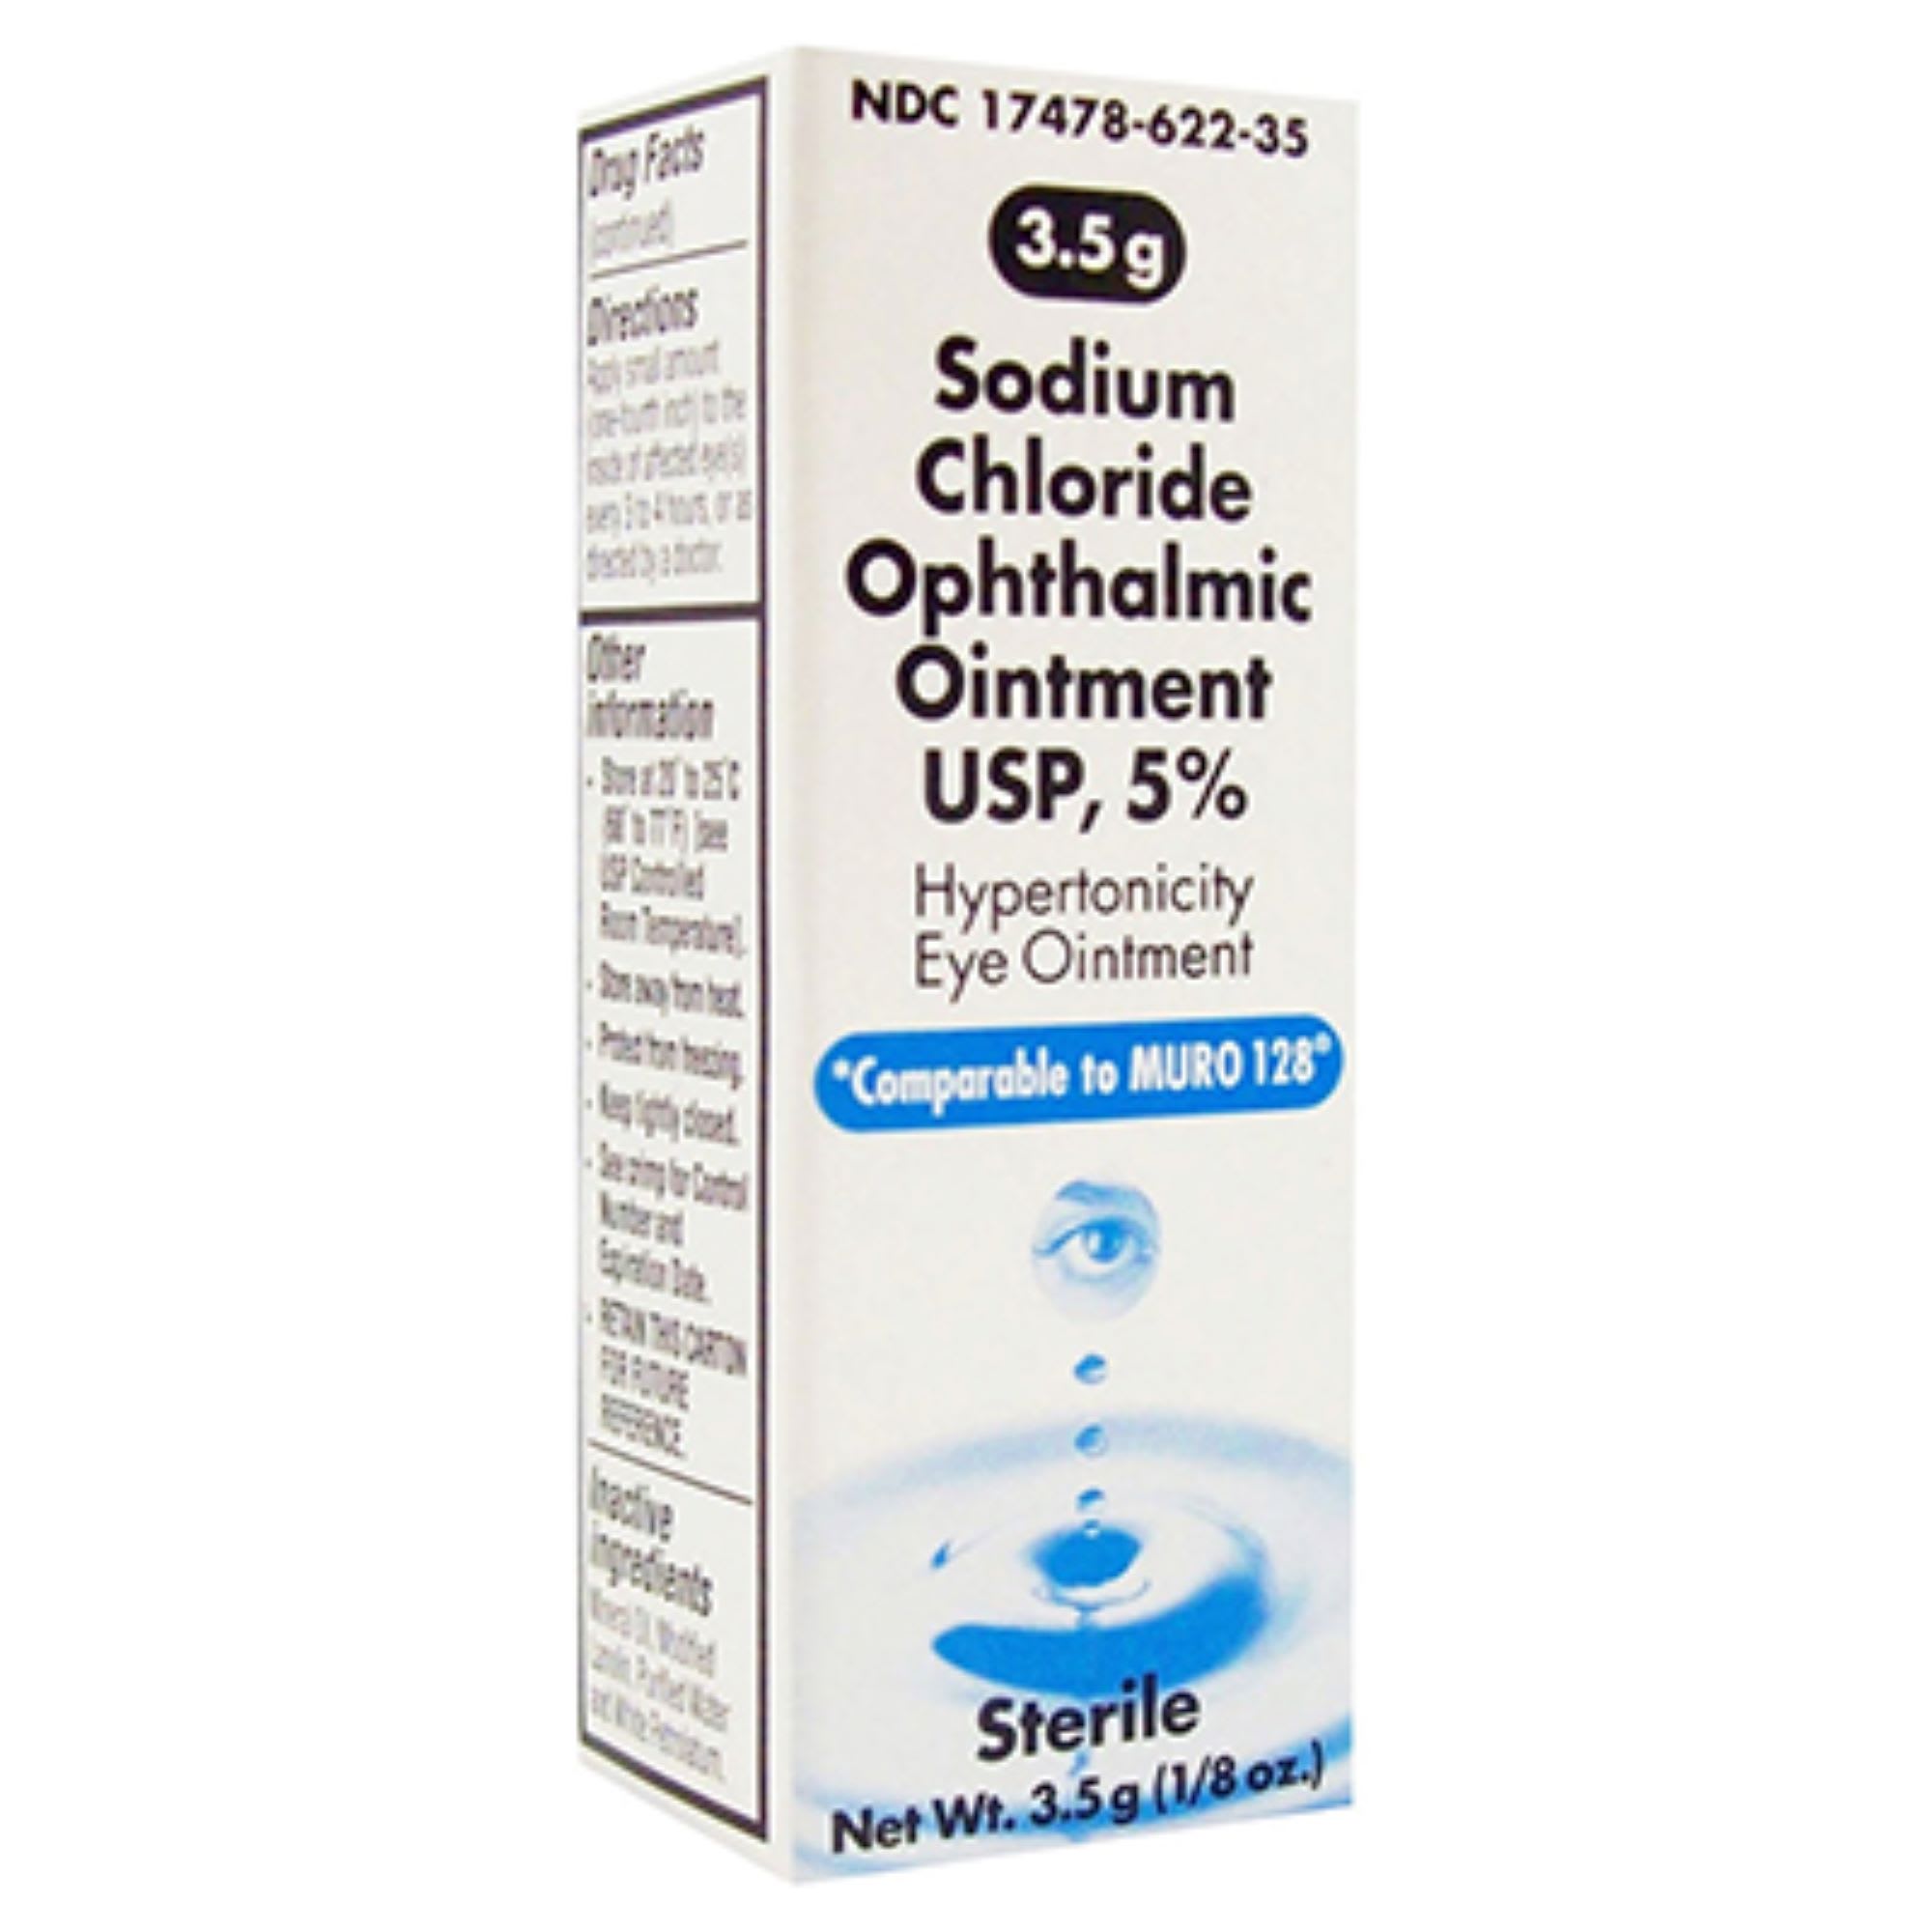 Sodium Chloride Ophthalmic Ointment, 3.5 gm